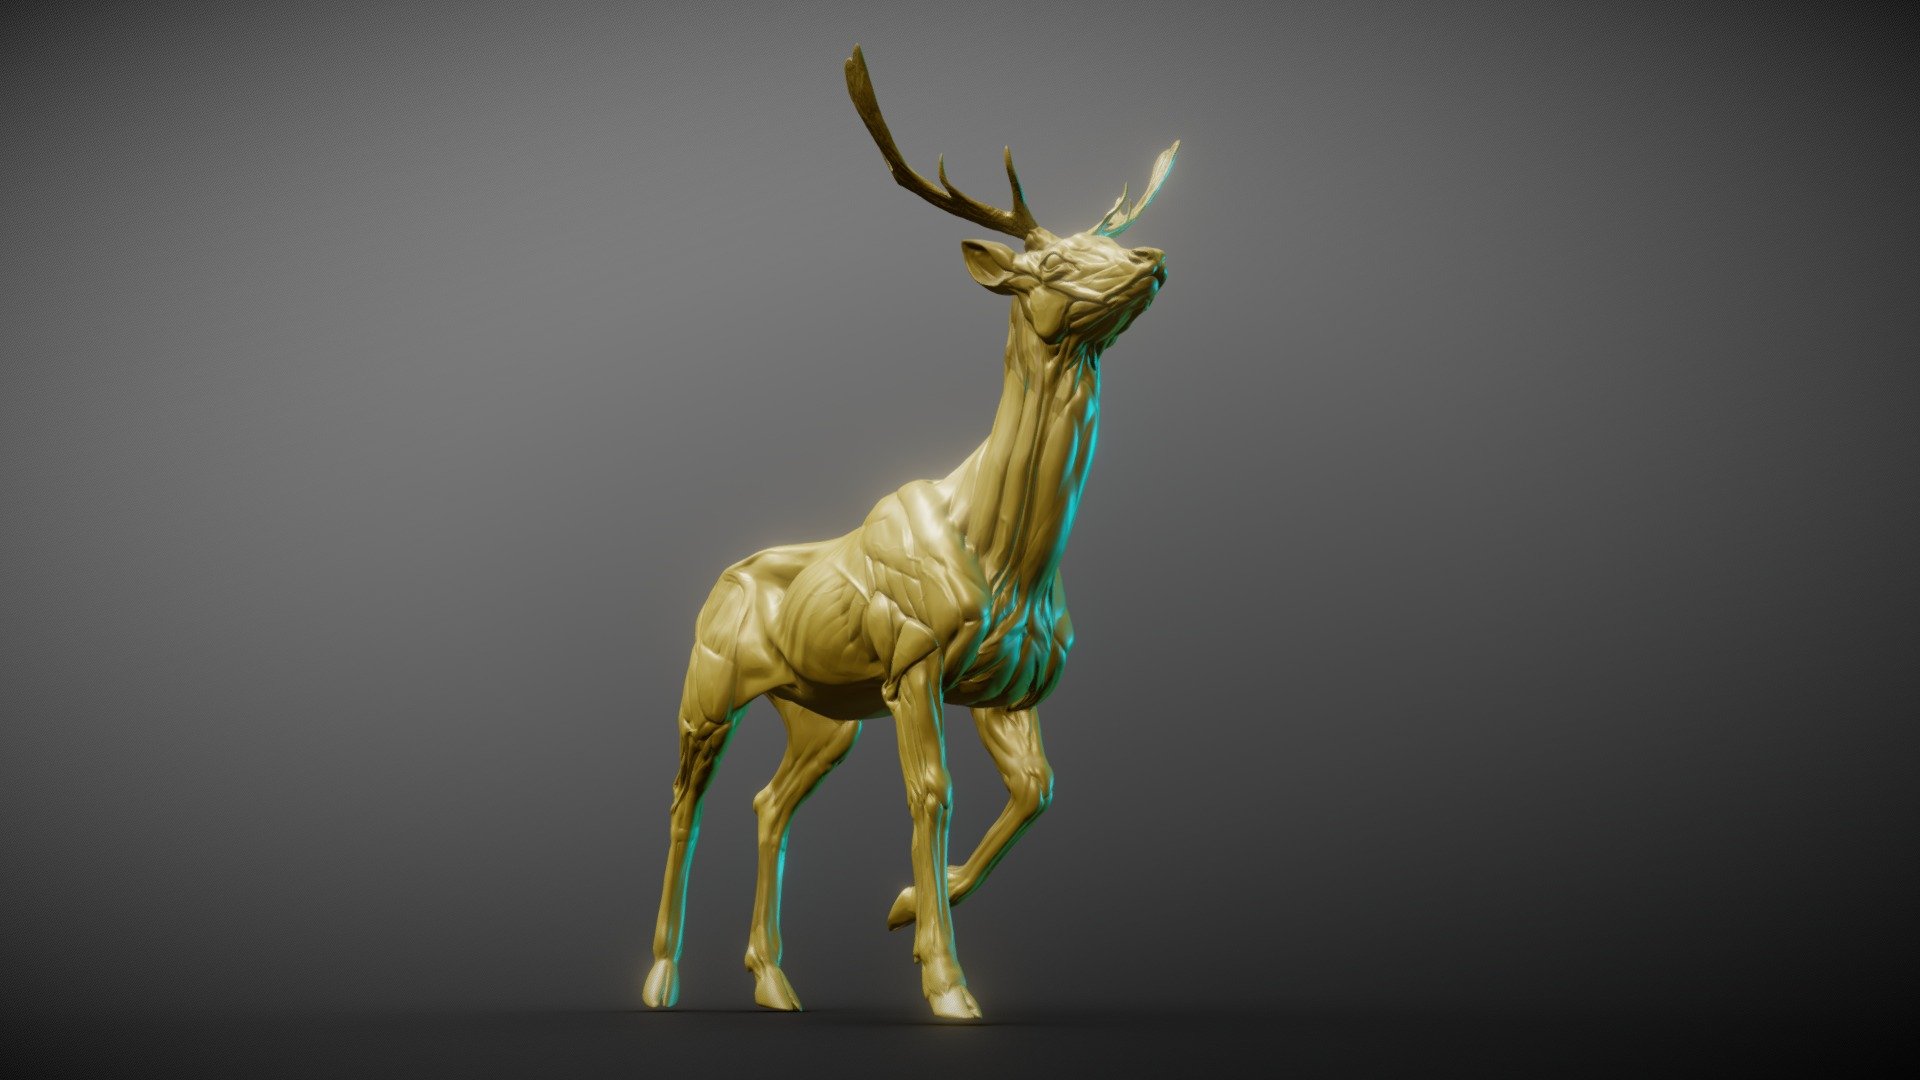 High poly 3d model of a Ethiopian Fawn Deer created in Zbrush. 
Model watertight and can be printed. Additional stl file format.
Hope you like it 3d model